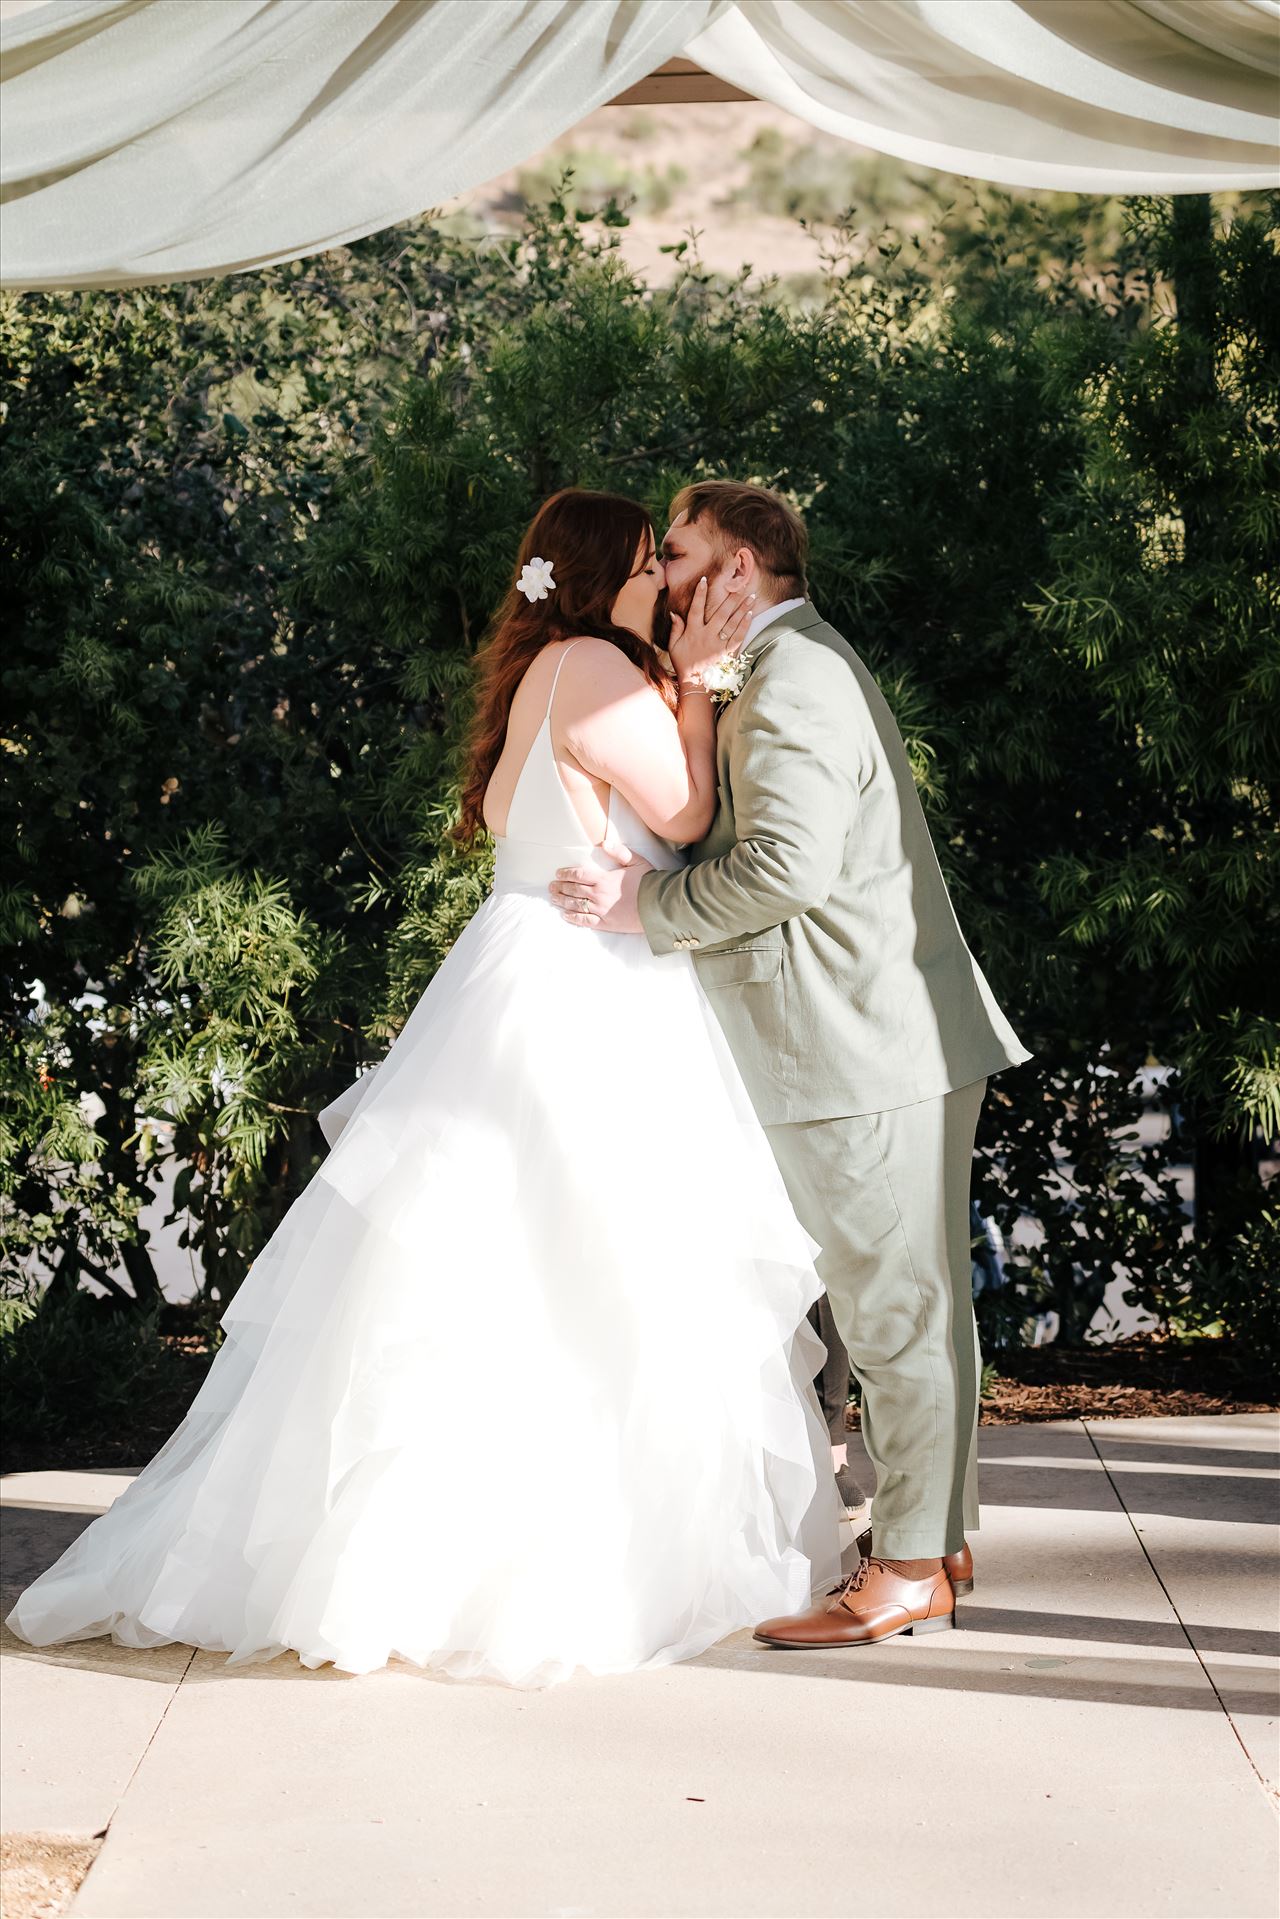 Final-4482.jpg - Sarah Williams of Mirror's Edge Photography, a San Luis Obispo County Wedding and Engagement Photographer, captures the amazing wedding of Justine and Reece at the Monday Club in San Luis Obispo California. The kiss bride and groom by Sarah Williams